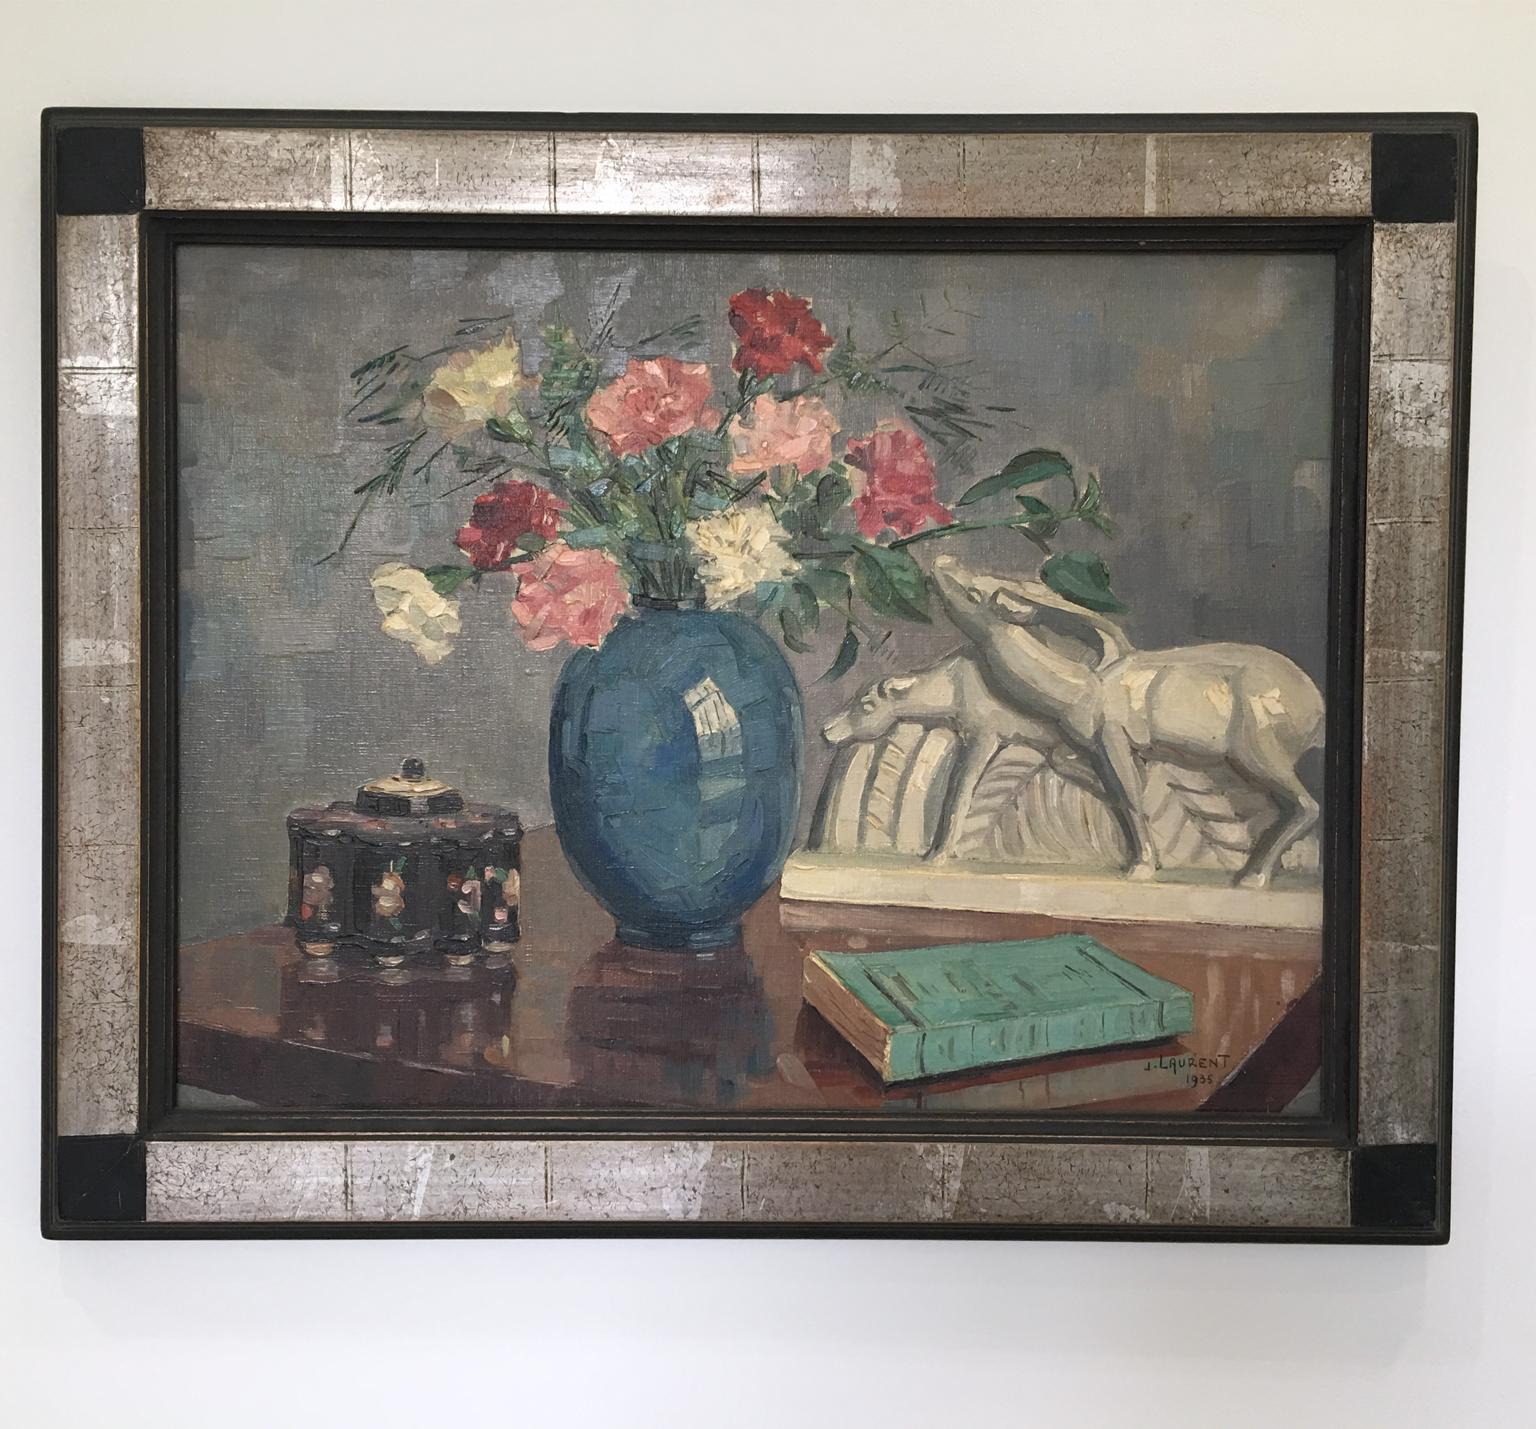 French Art Deco Still-Life Lemanceau Crackle Ceramic Oil on Canvas Painting  - Gray Still-Life Painting by J. Laurent